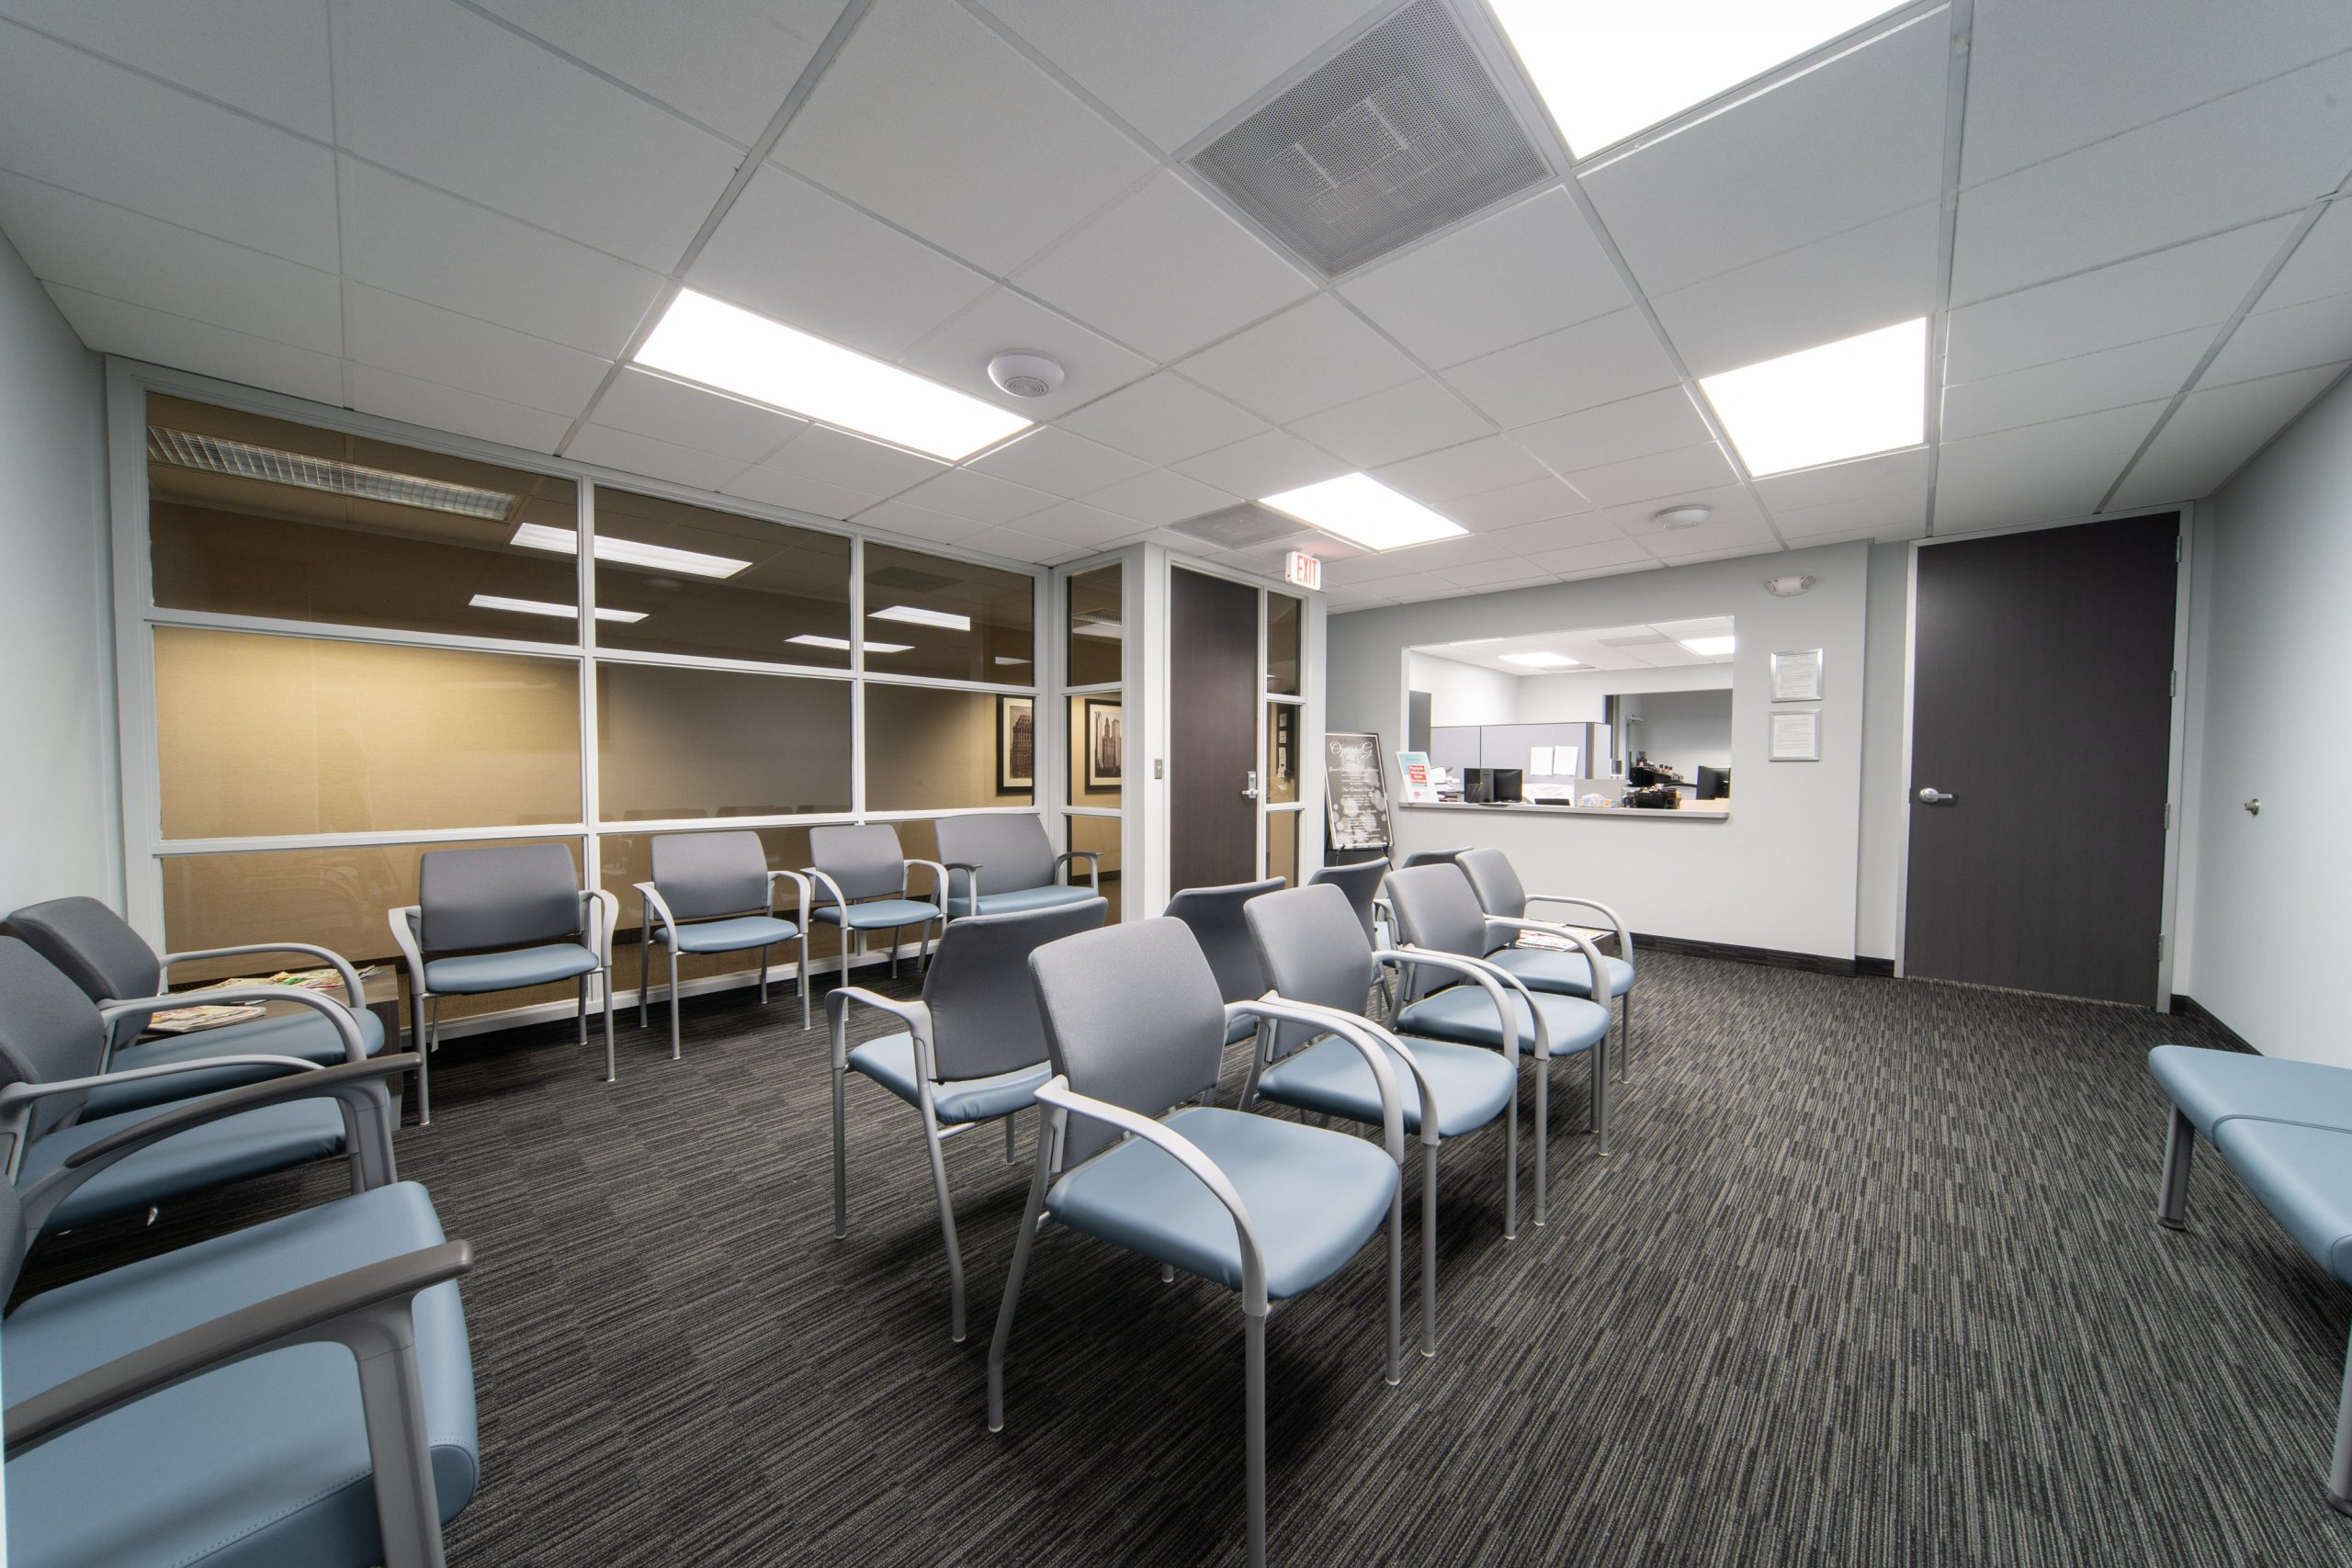 The Impact of COVID-19 on Medical Waiting Room Design - Premier  Construction & Design